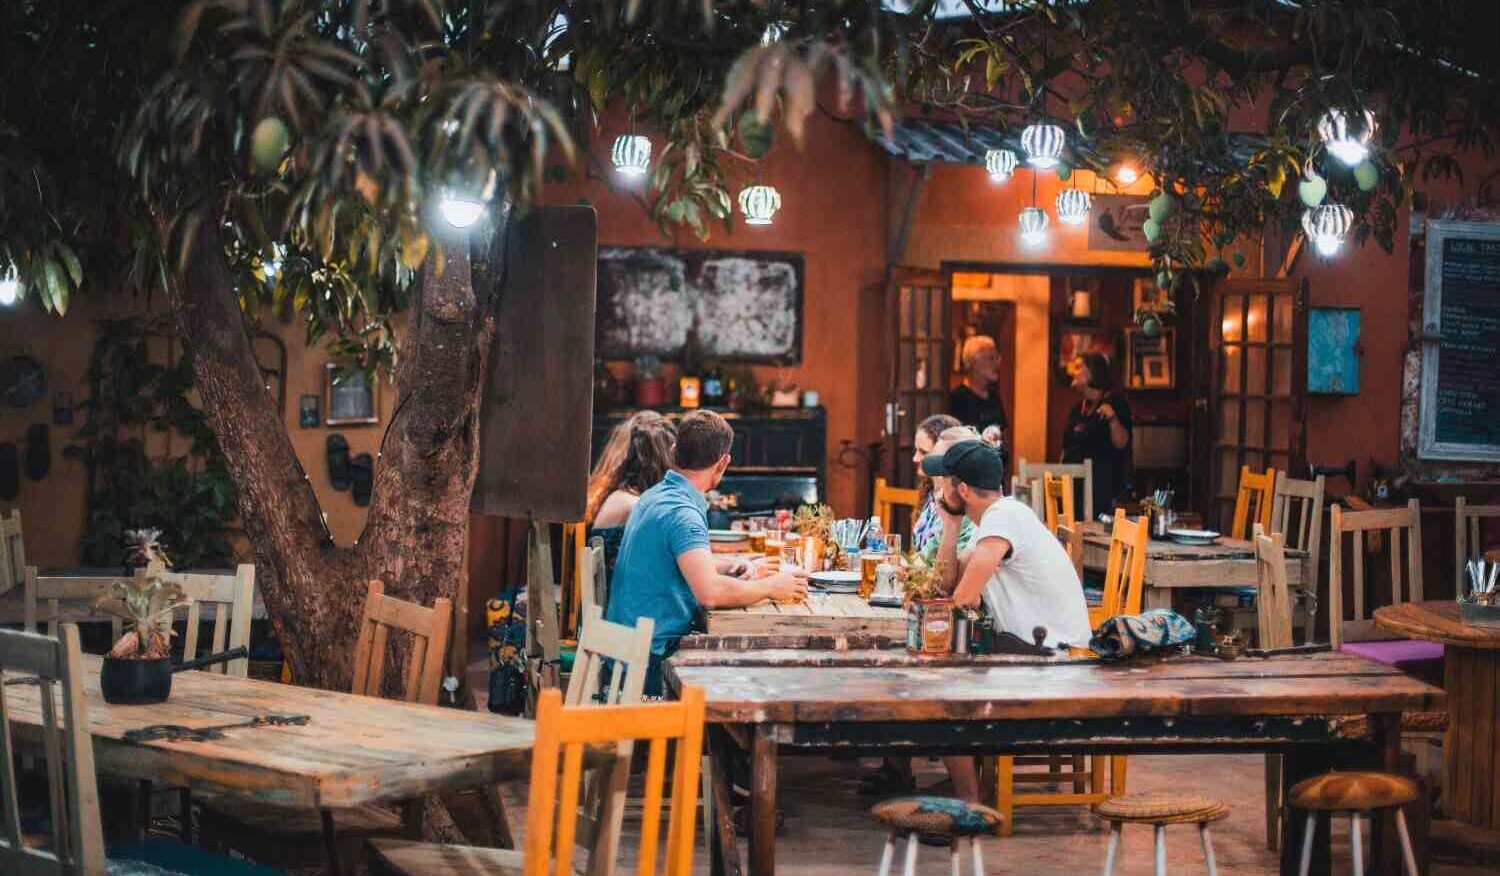 The relaxed vibe at local restaurant Dusty Road